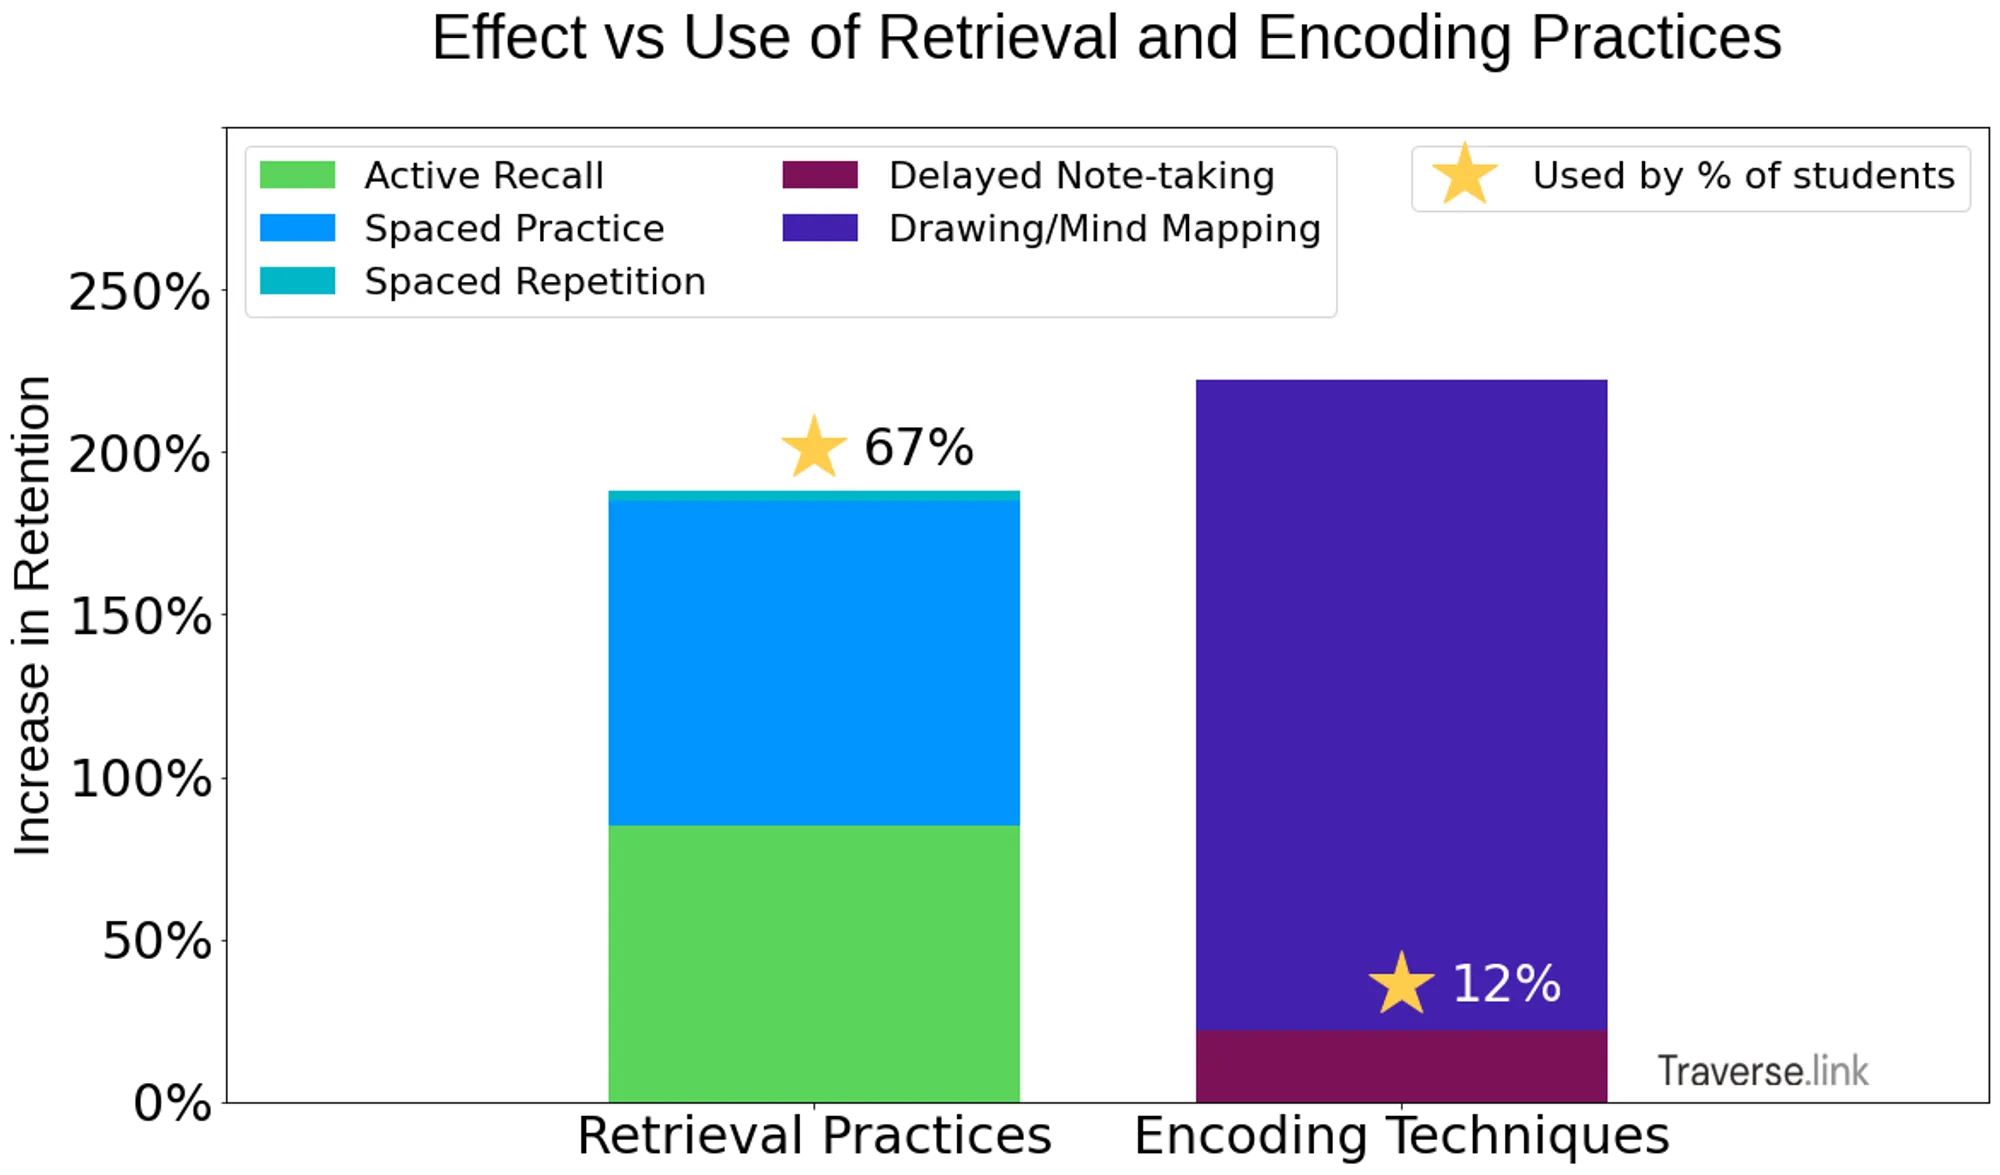 Effectiveness of retrieval and encoding practice, compared to actual use by students.